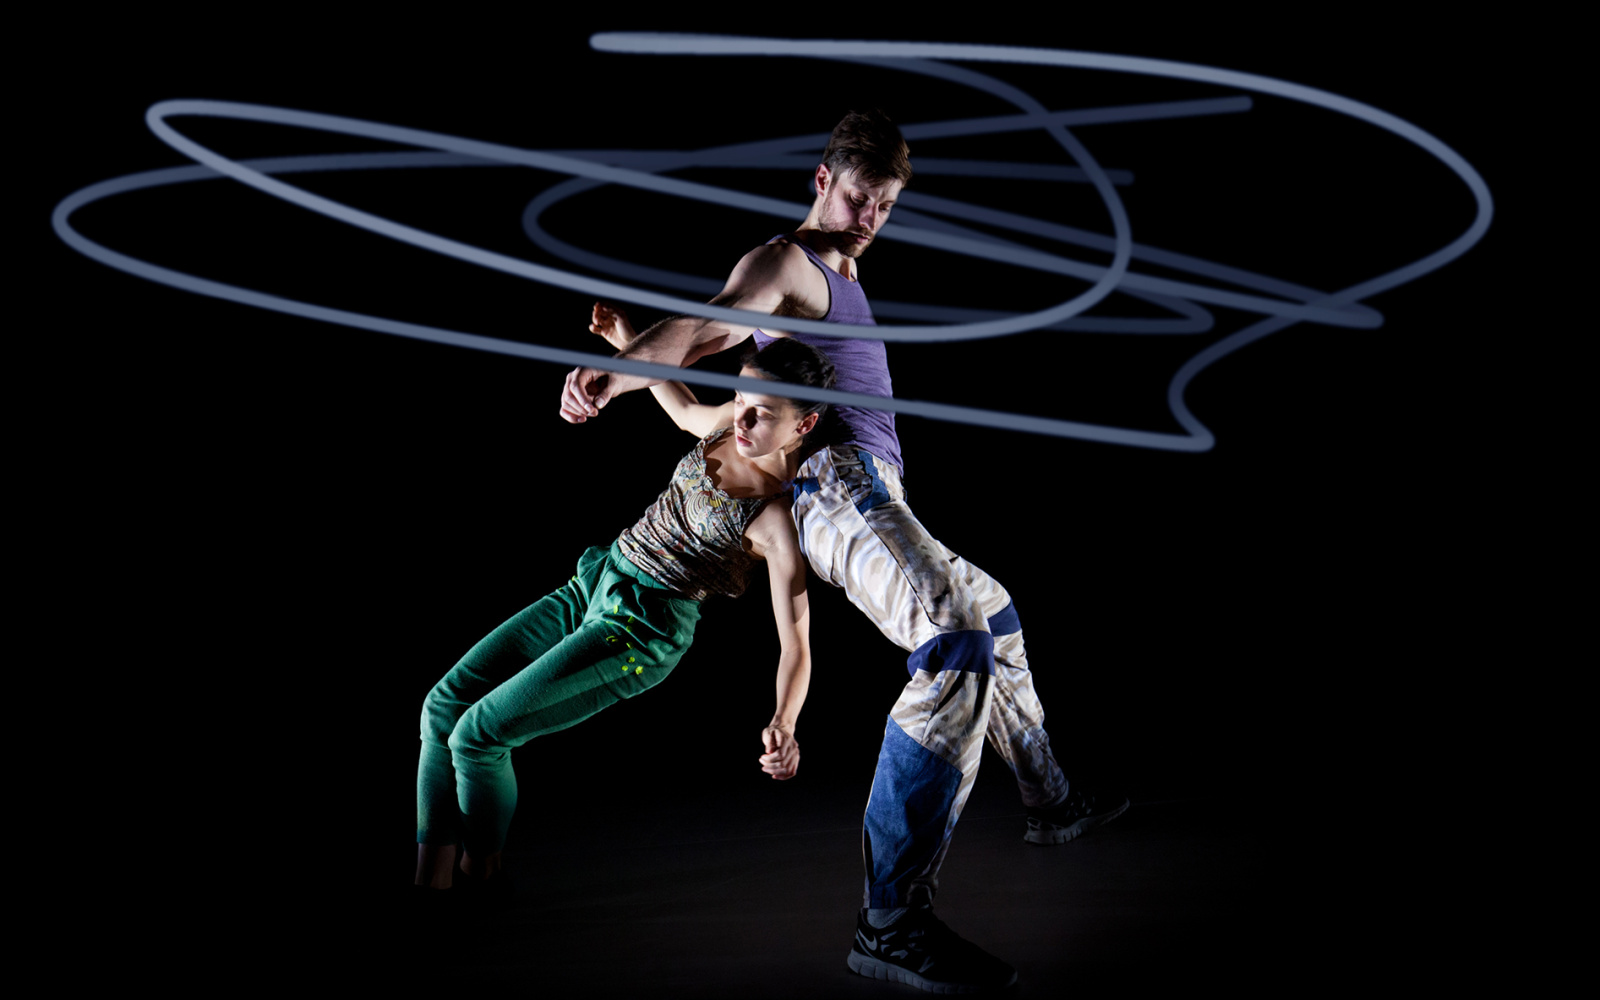 Two dancers in front of black background, wrapped by circular lighting beams